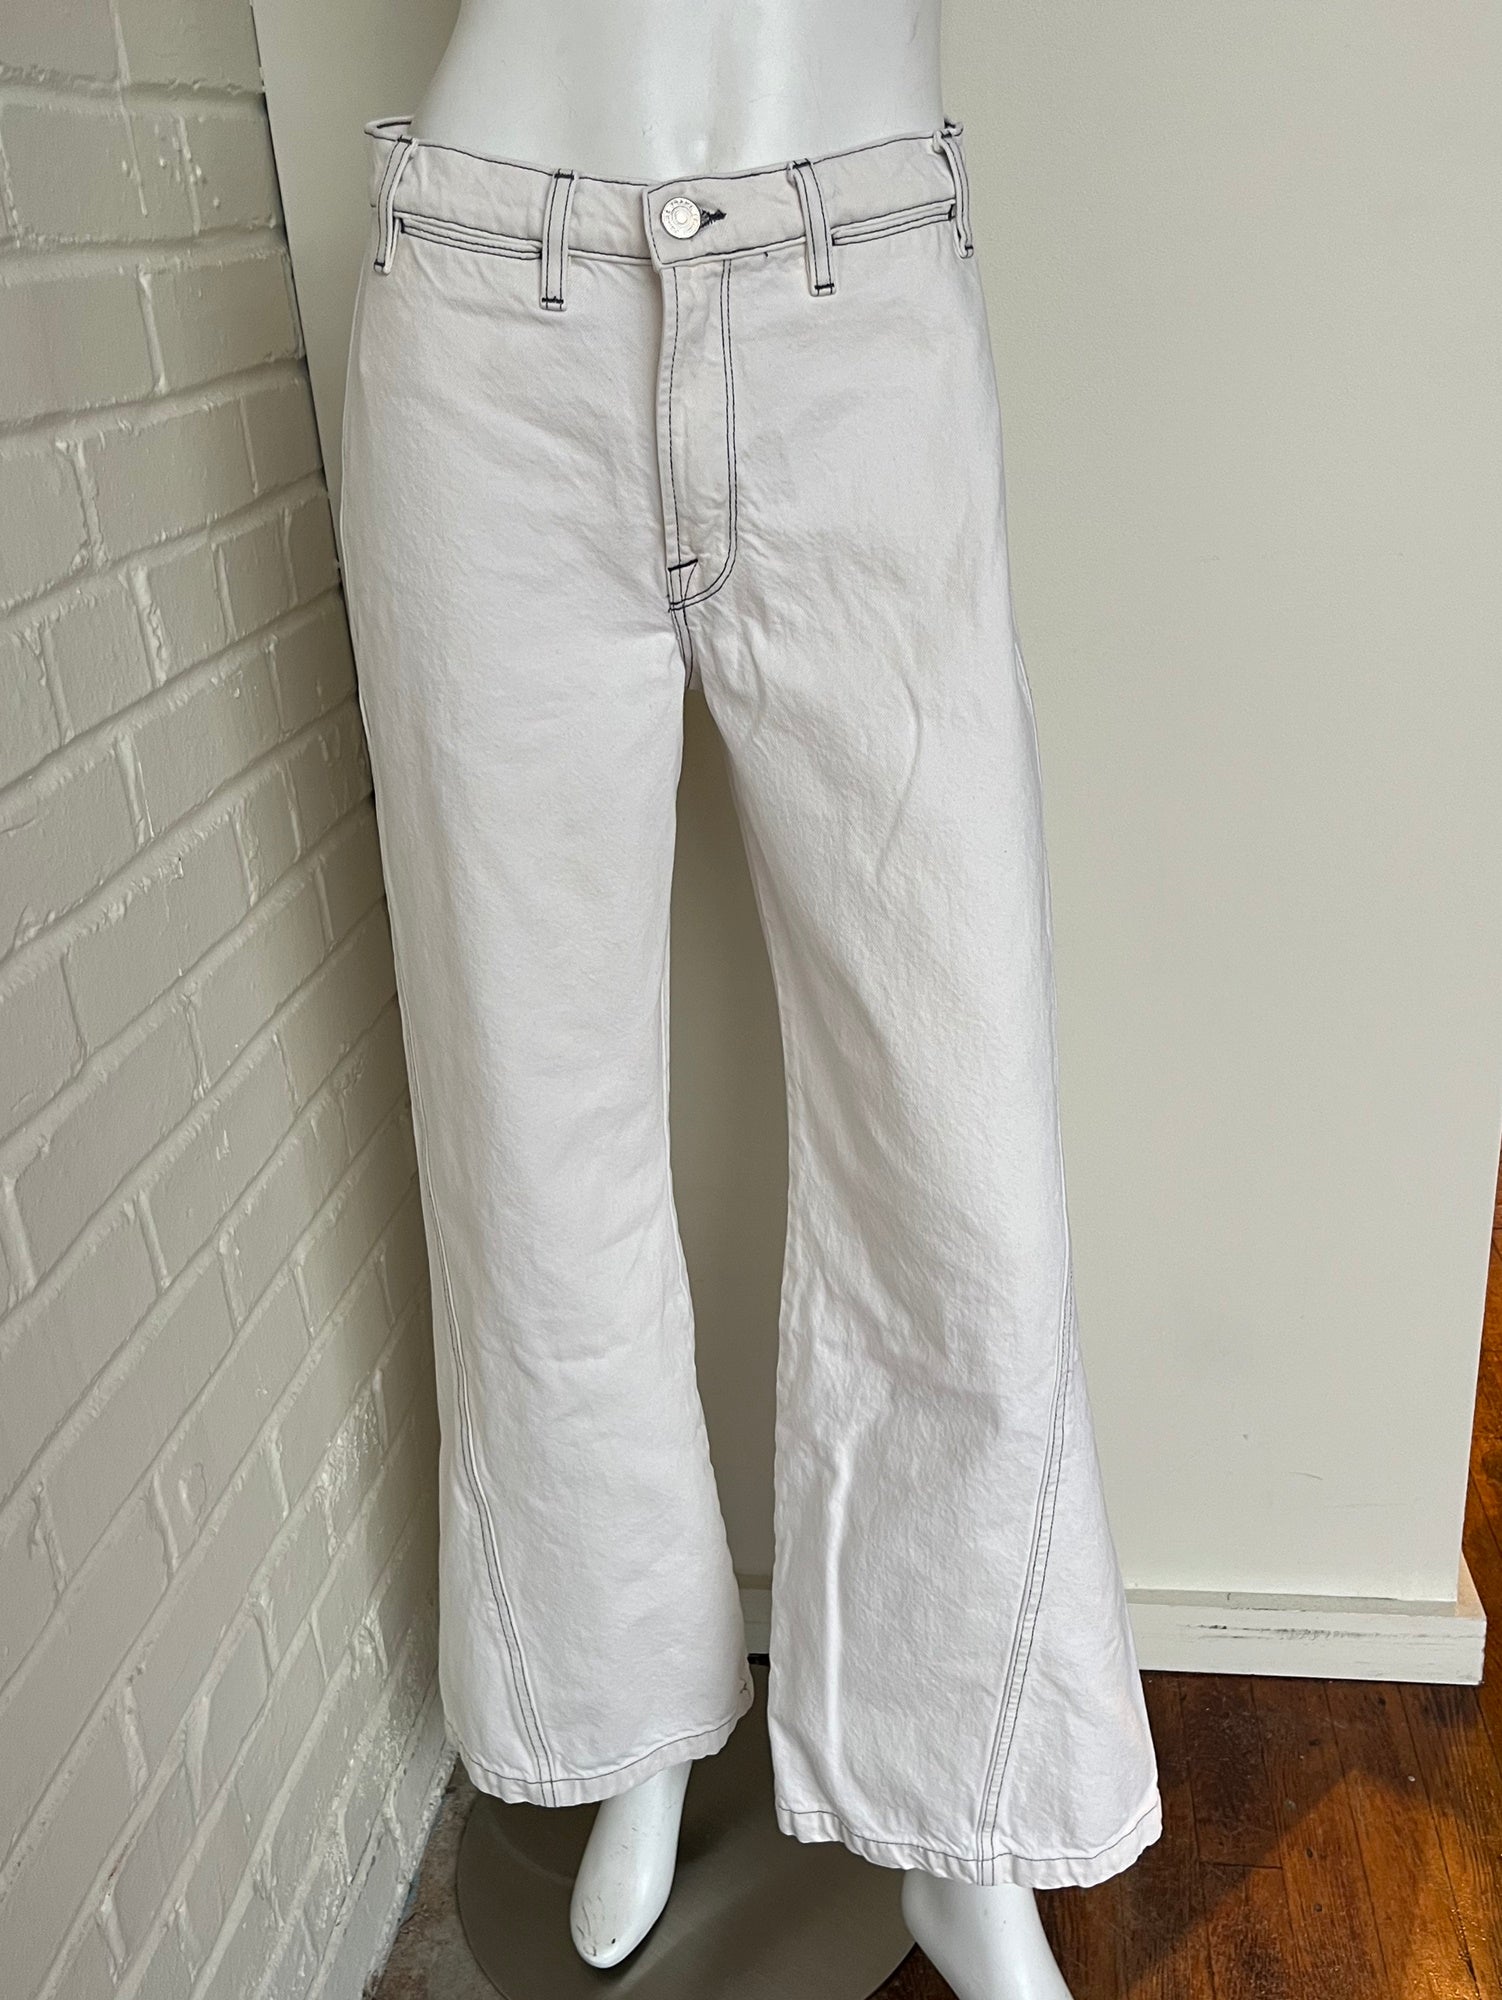 Le Baggy Palazzo Jeans Size 25